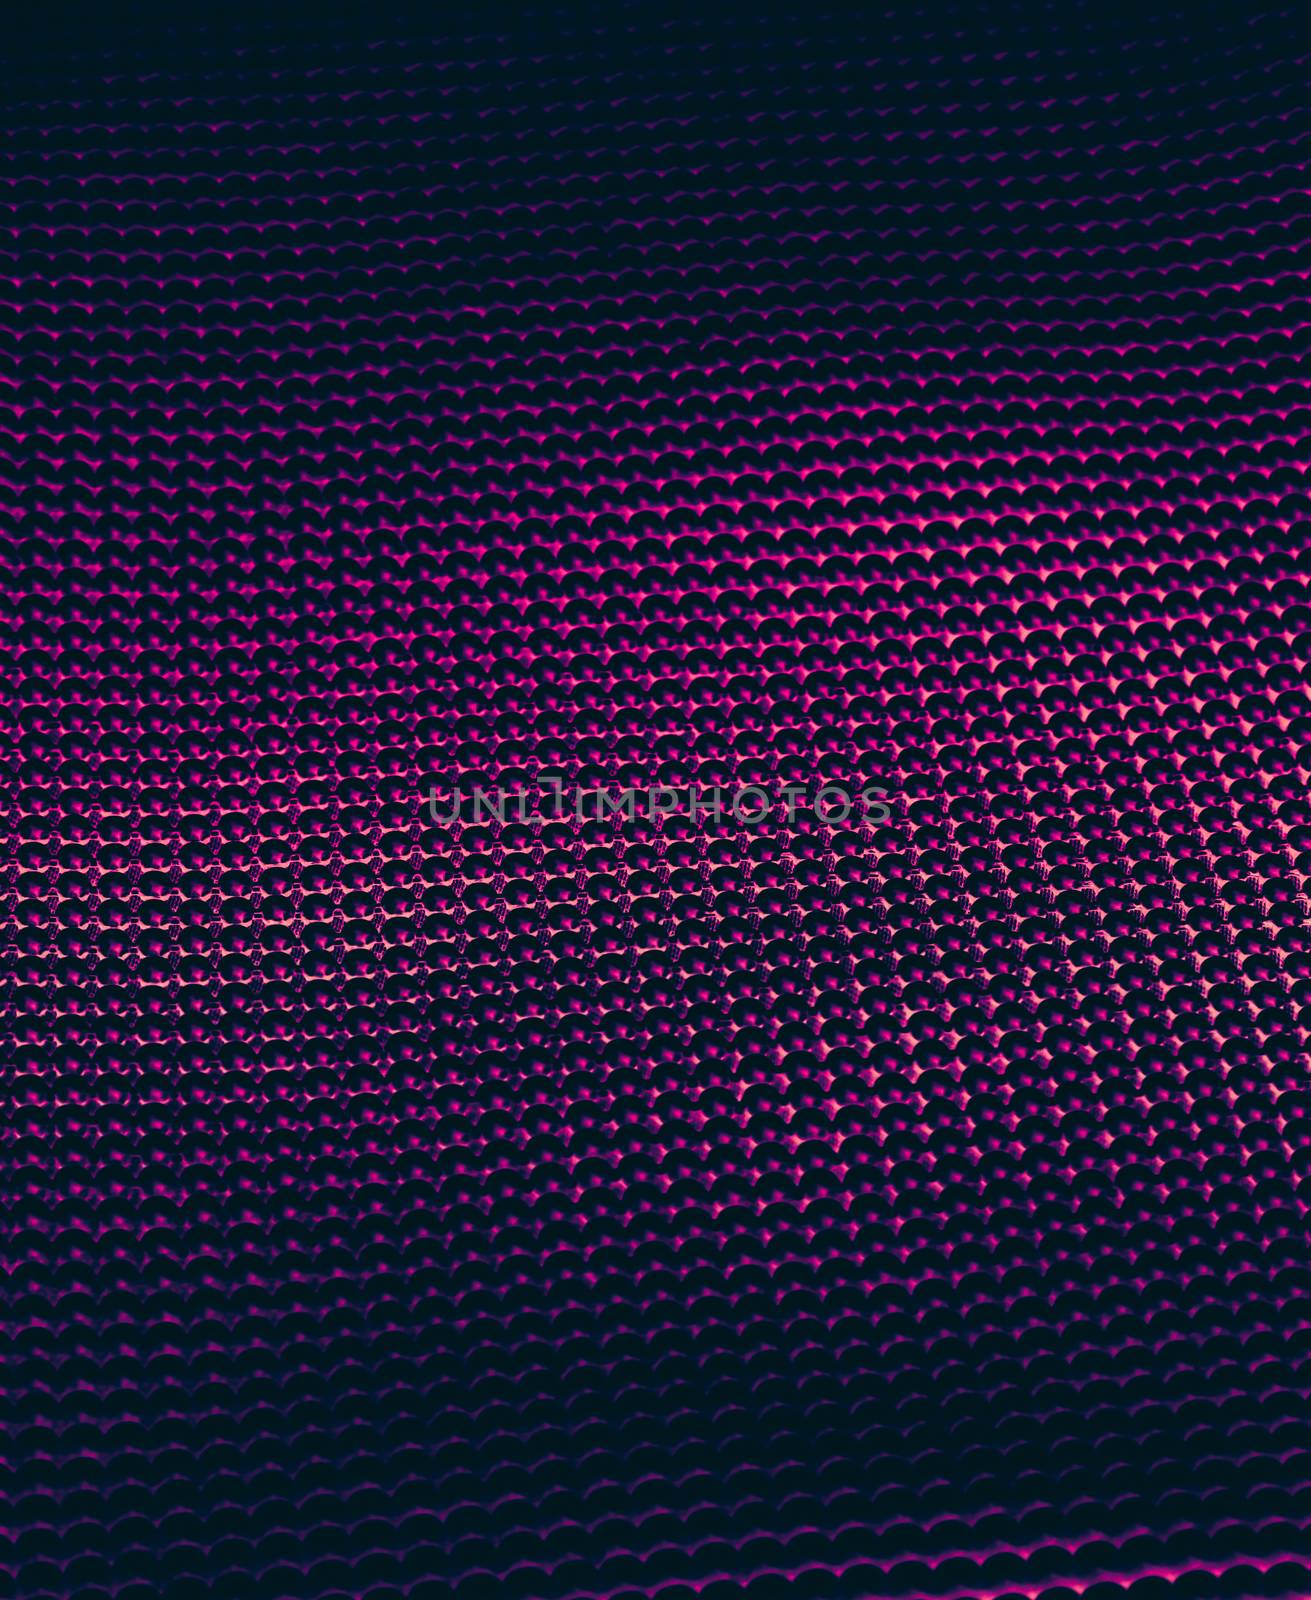 Pink metallic abstract background, futuristic surface and high tech materials